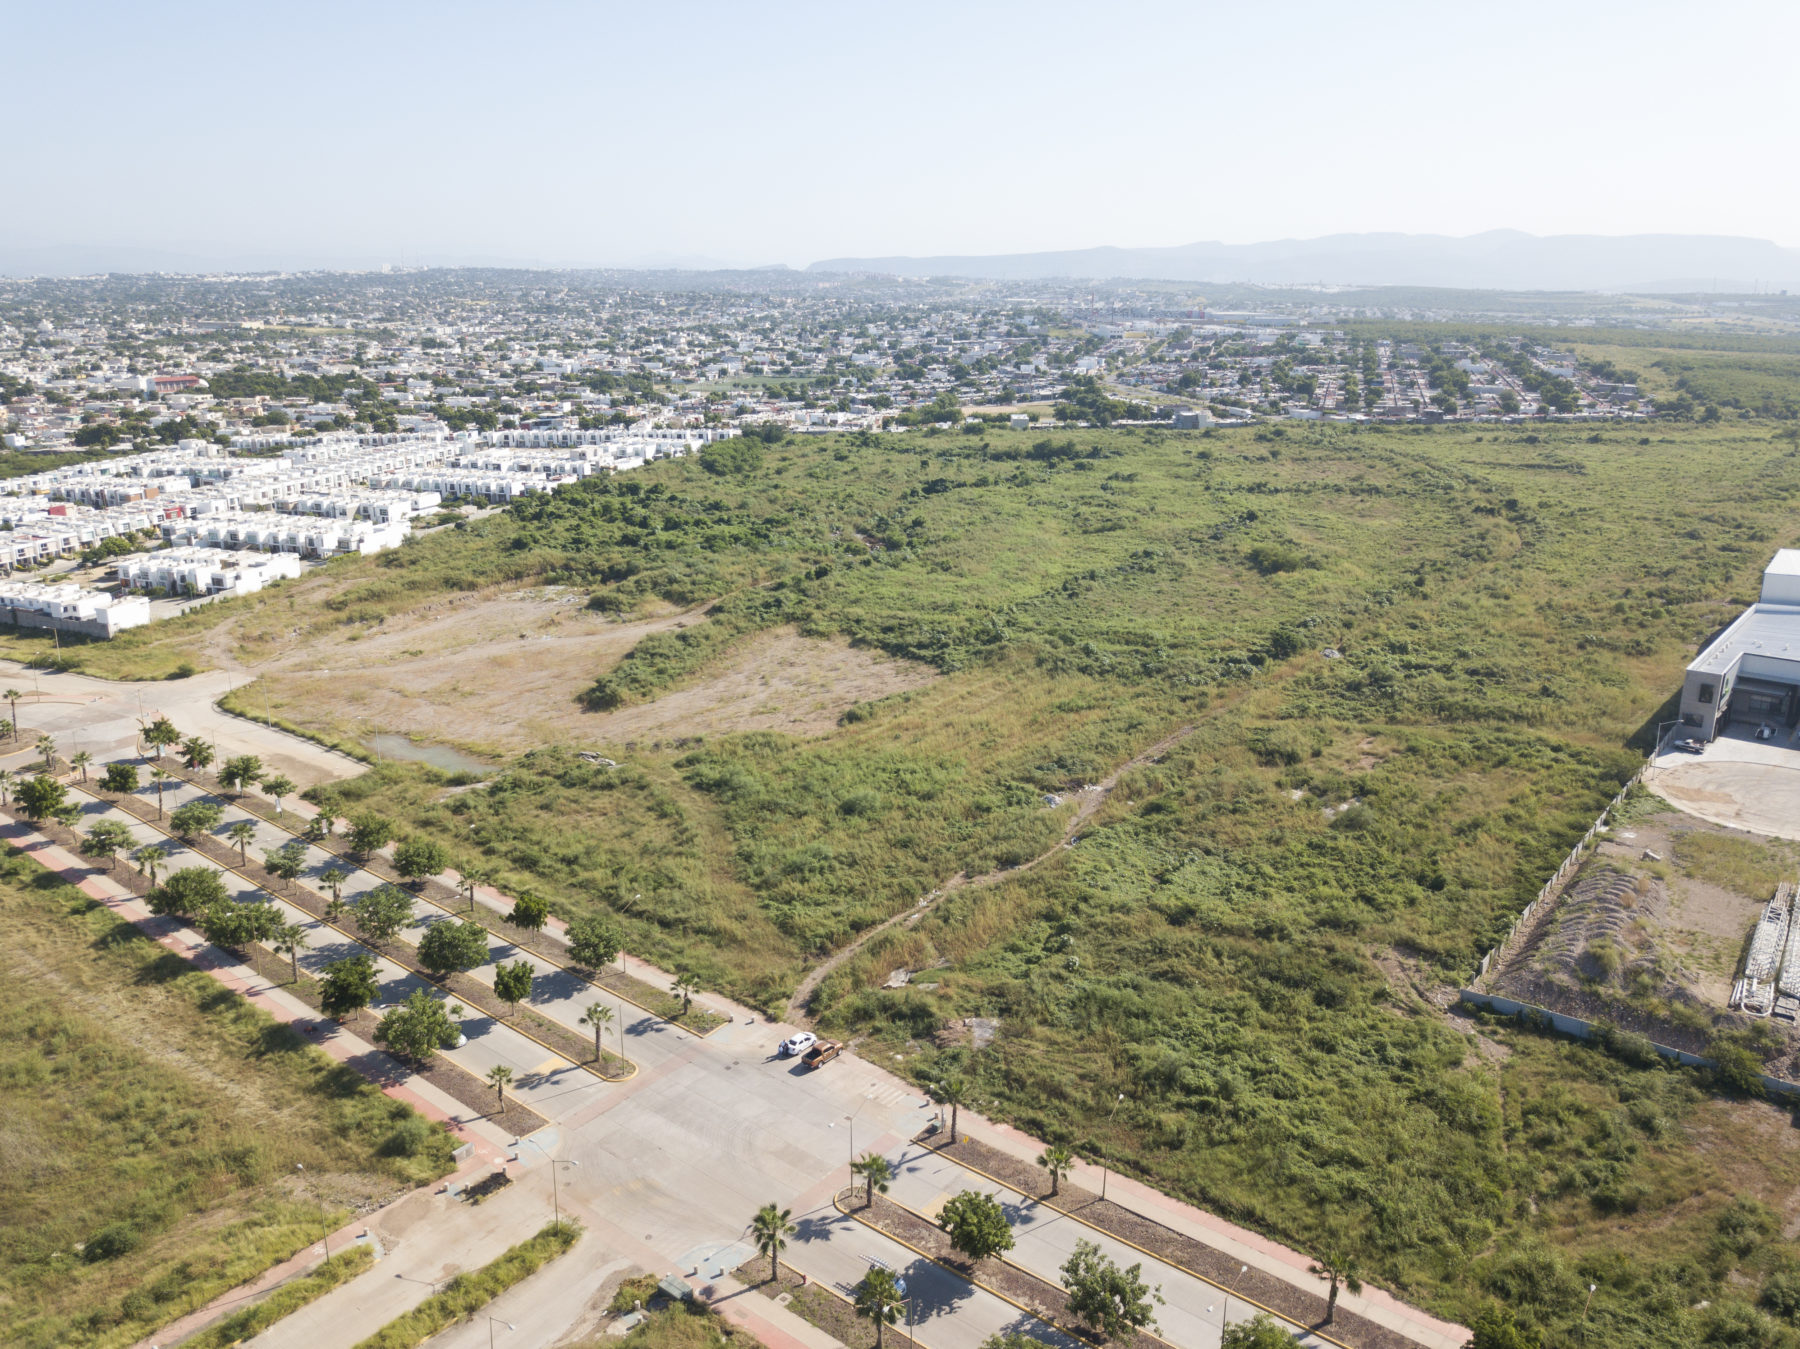 aerial view of large grassy expanse surrounded by minimal development